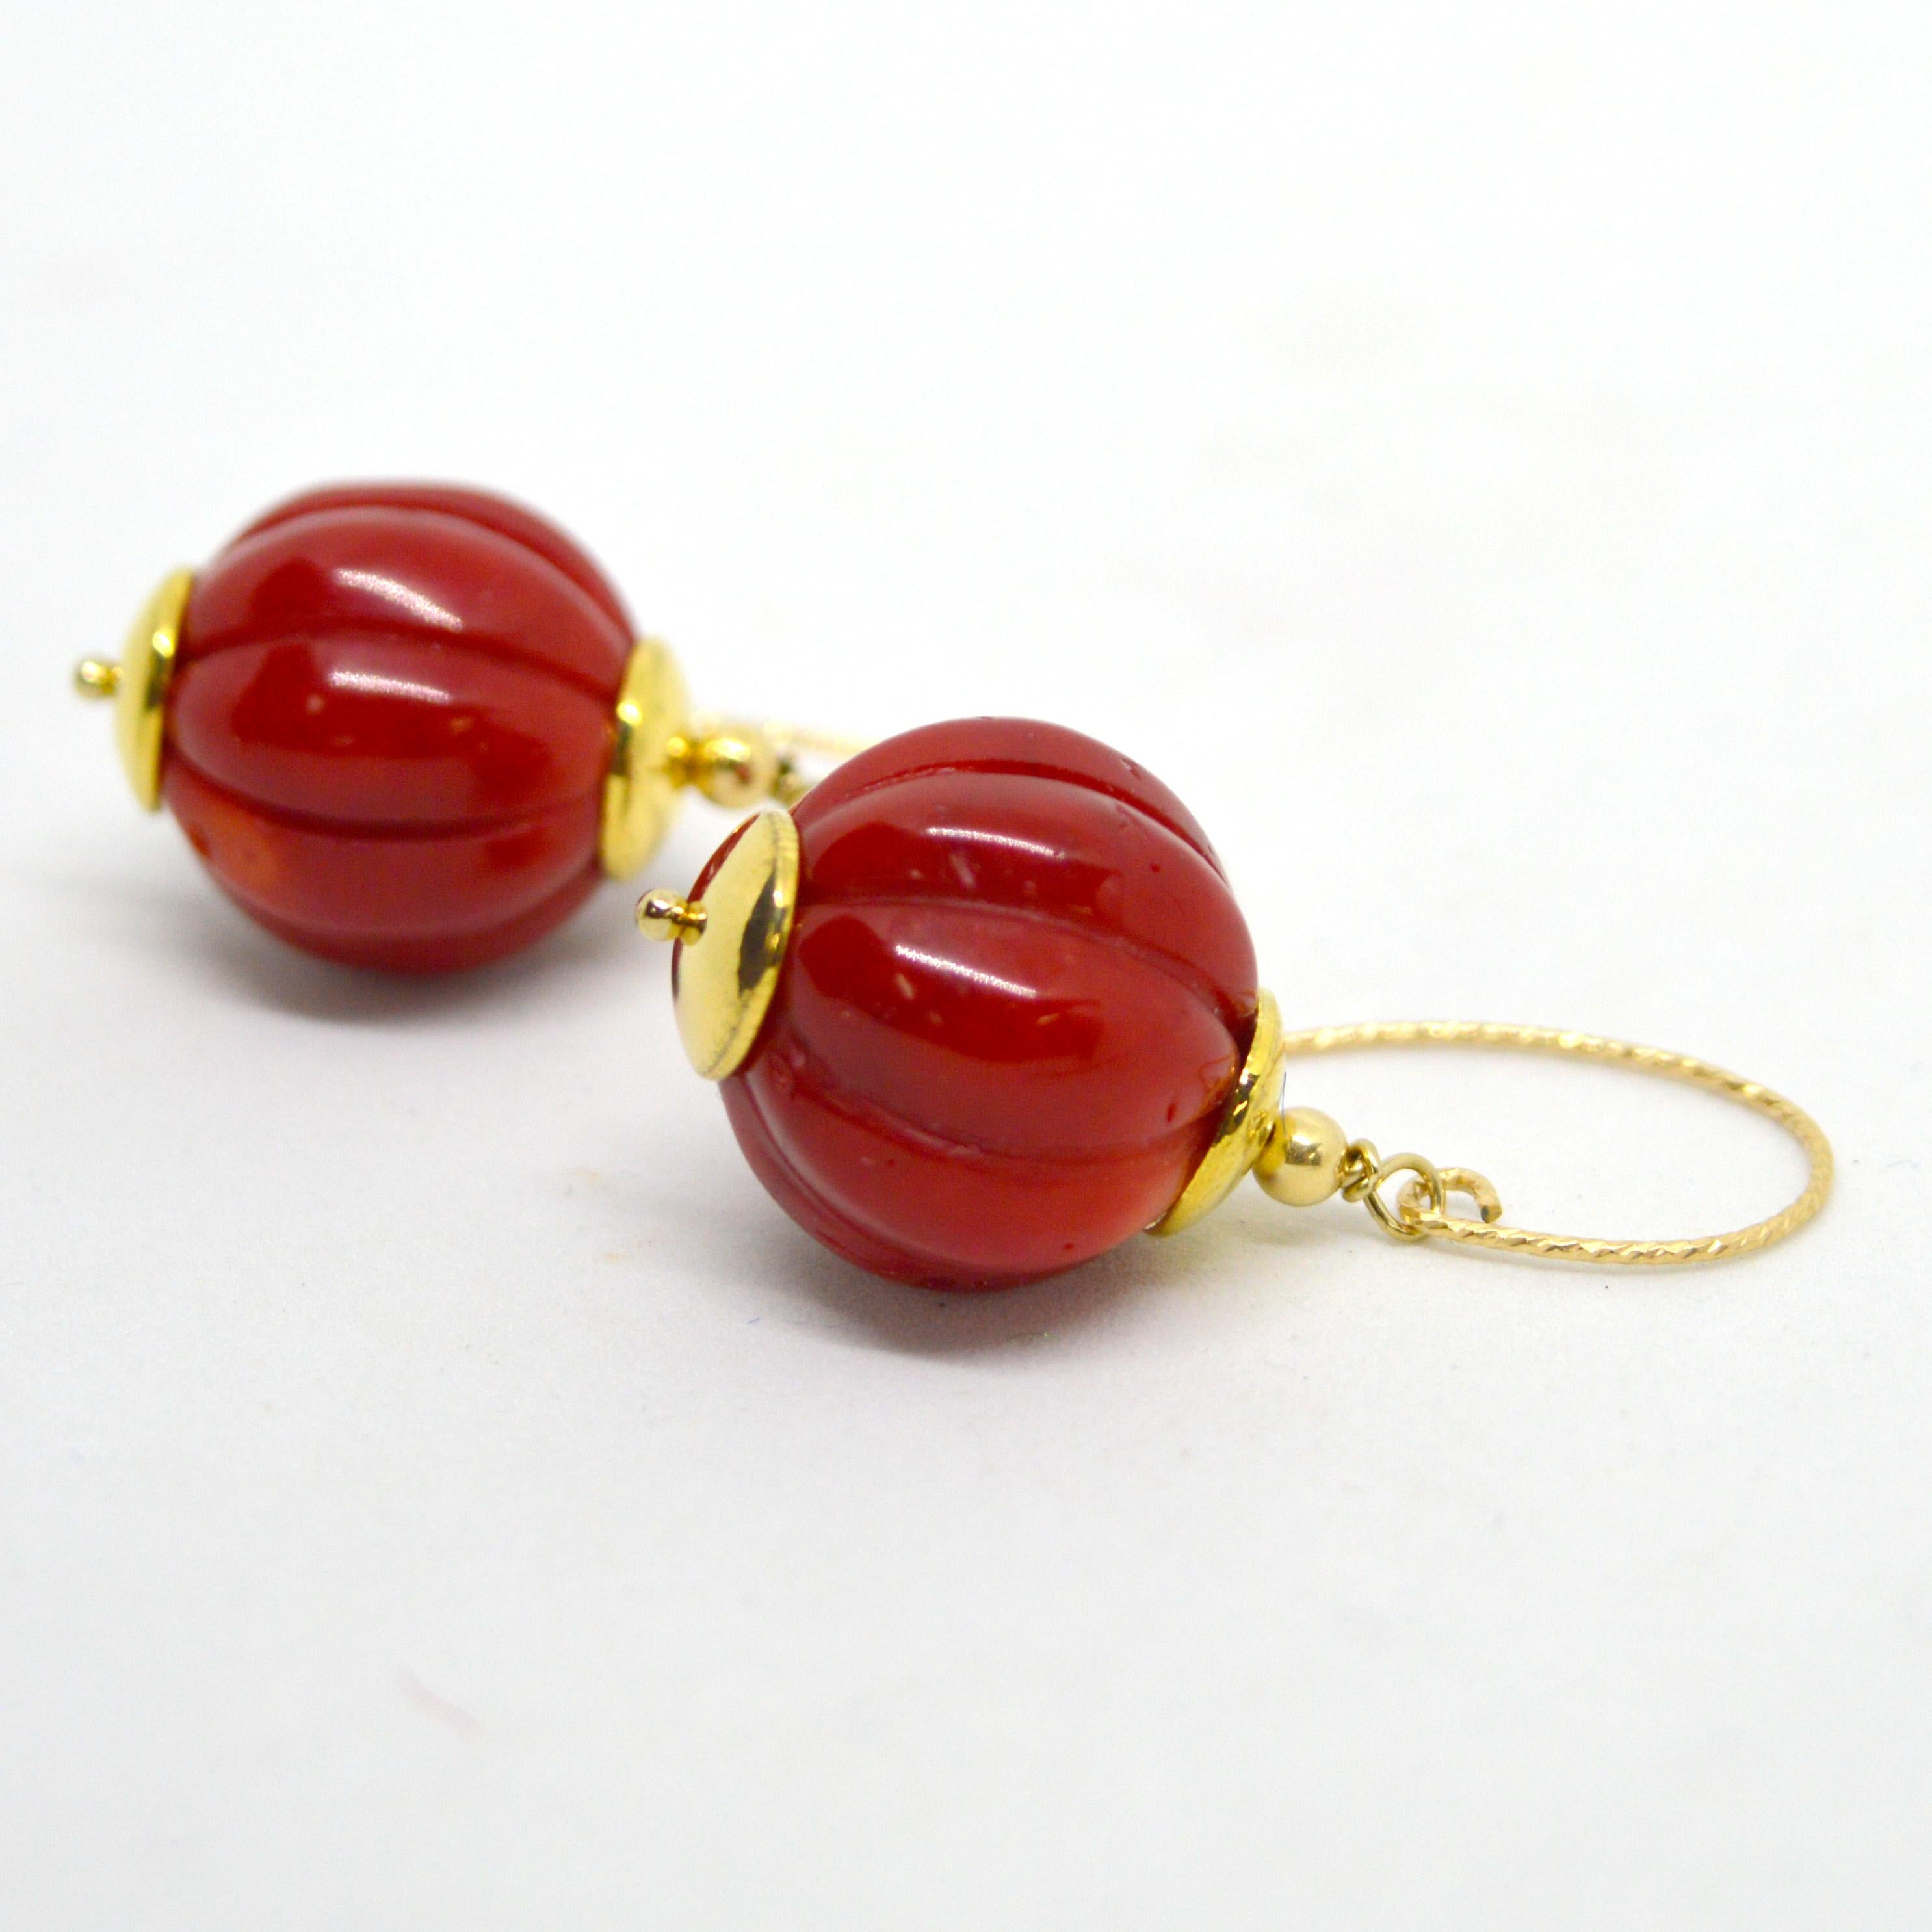 Women's Decadent Jewels Carved Red Sea Bamboo Gold Earrings